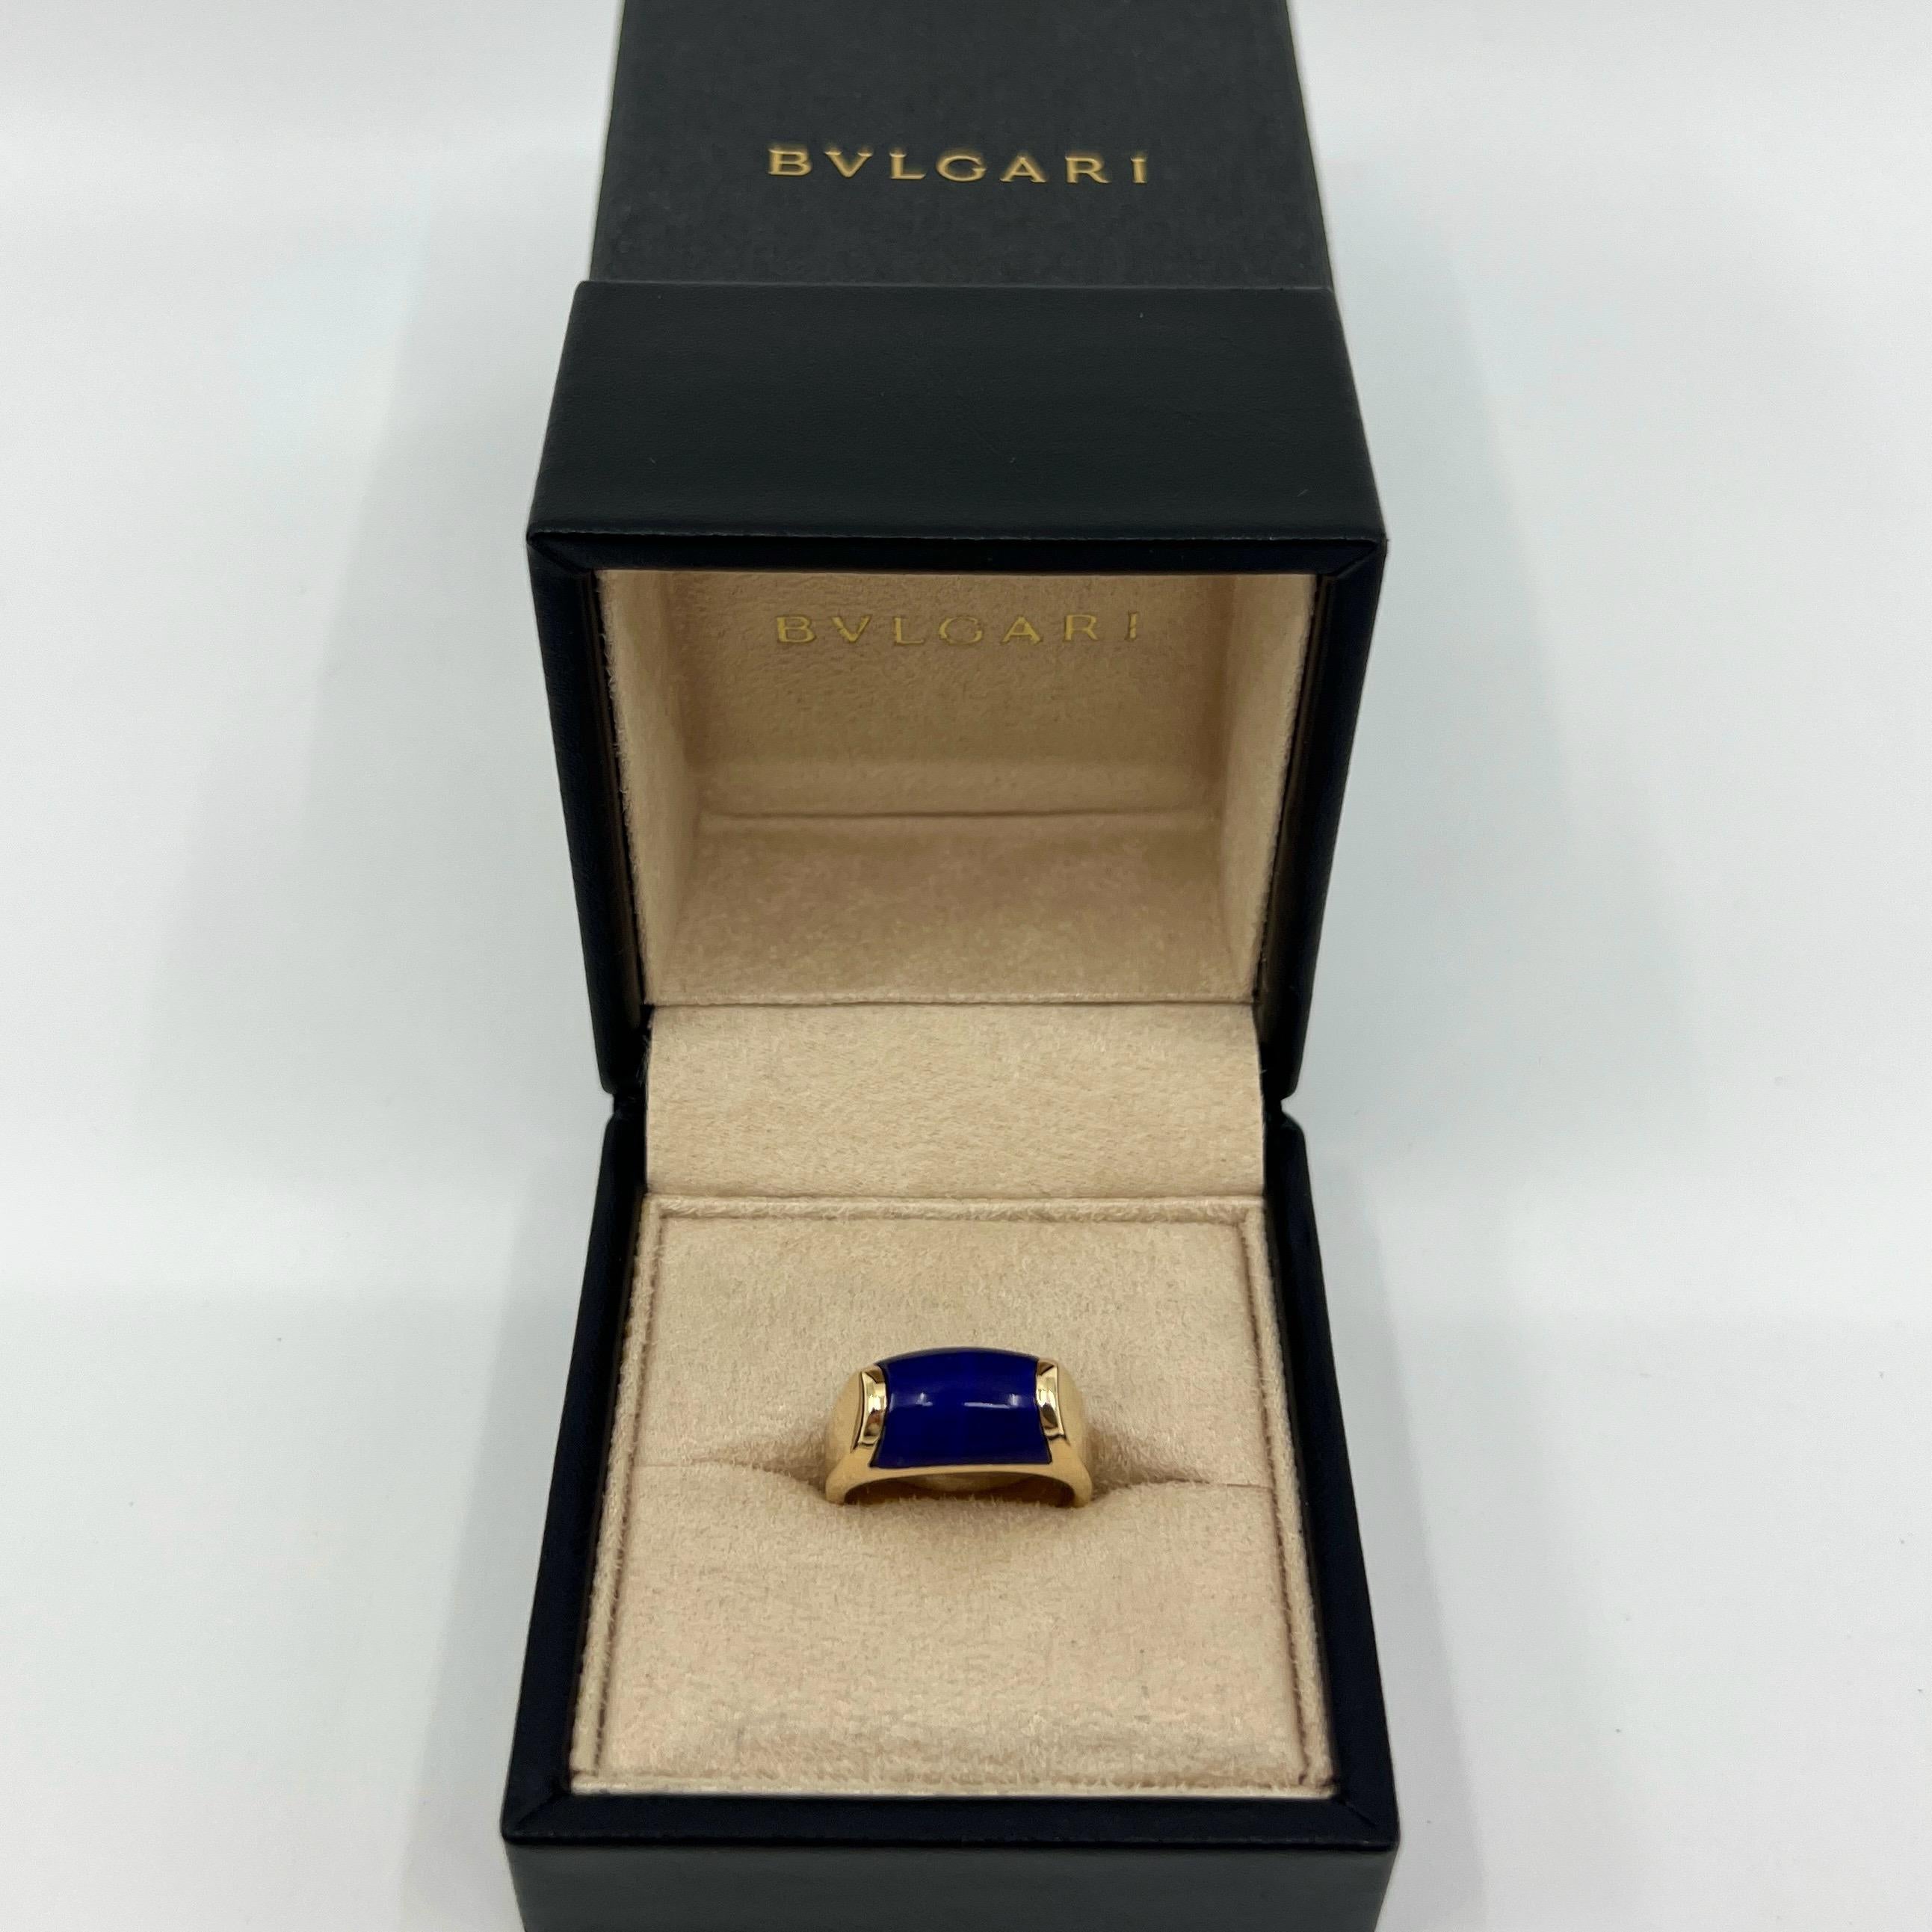 Rare Bvlgari Deep Blue Lapis Lazuli Tronchetto 18k Yellow Gold Ring.

Beautiful domed blue lapis lazuli set in a fine 18k yellow gold tension set ring.

In excellent condition, has been professionally polished and cleaned.

Ring size: UK L1/2 - US 6